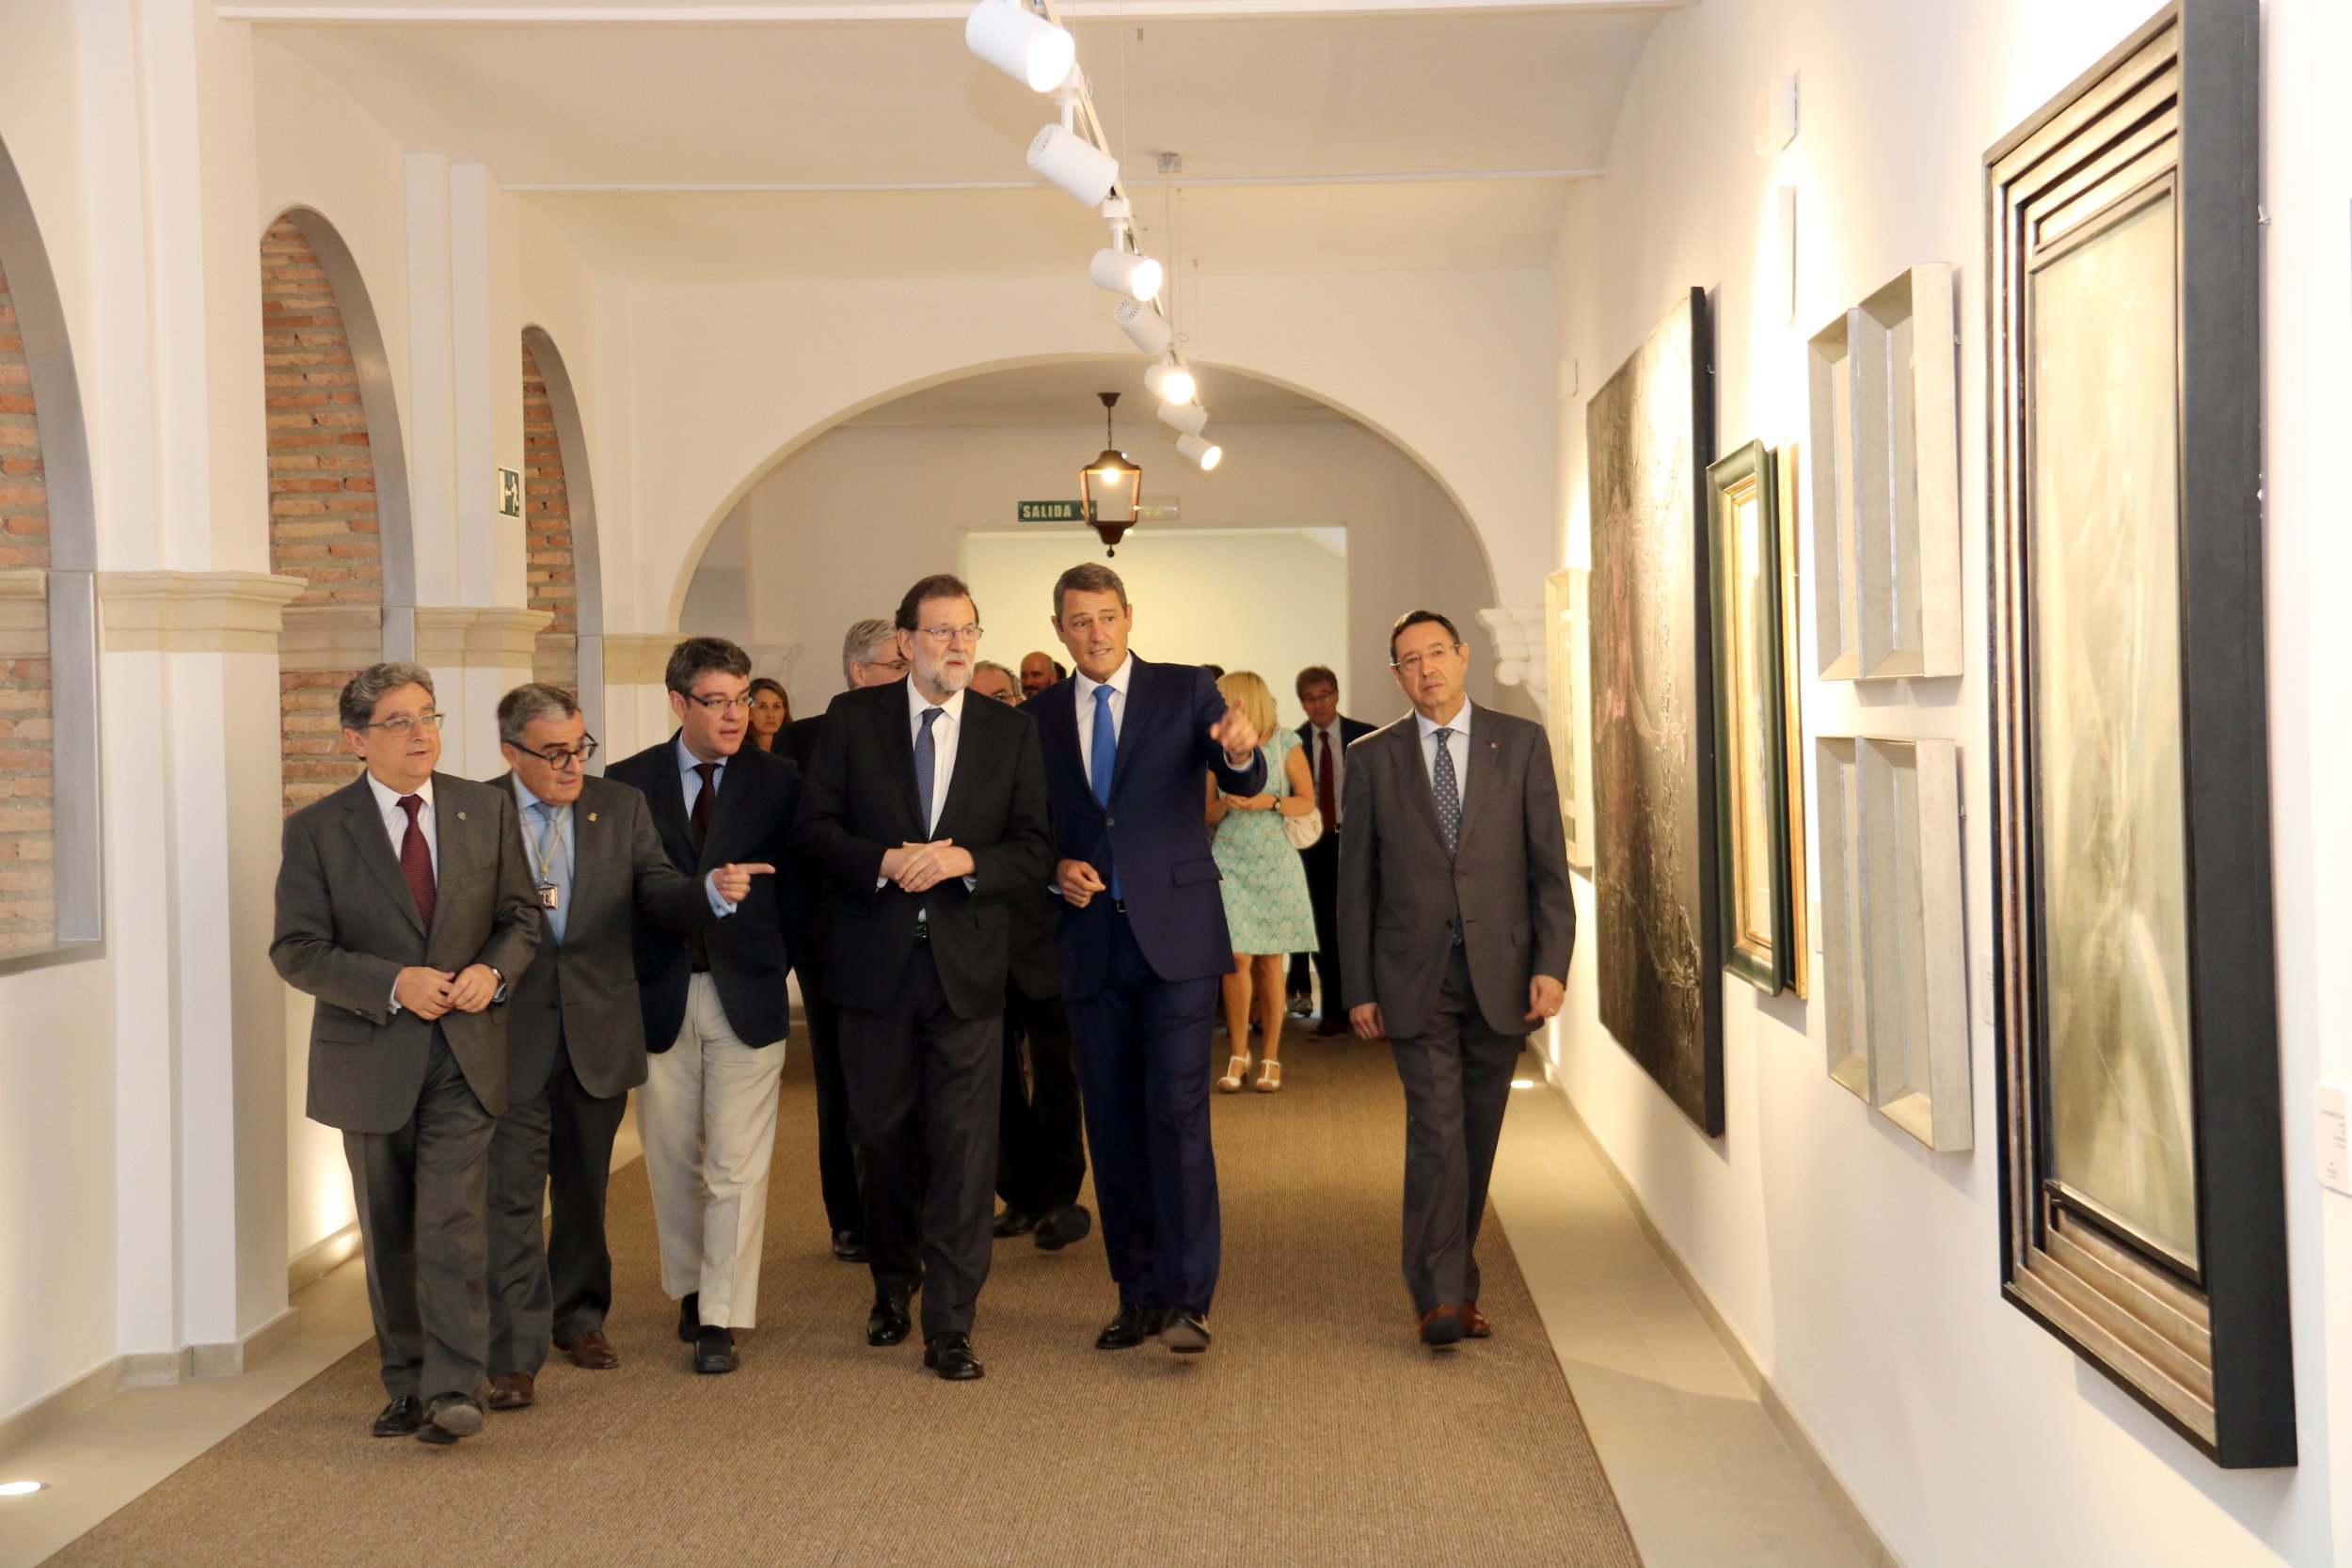 The Spanish president at the inauguration of the Parador del Roser in Lleida (by Laura Cortés)